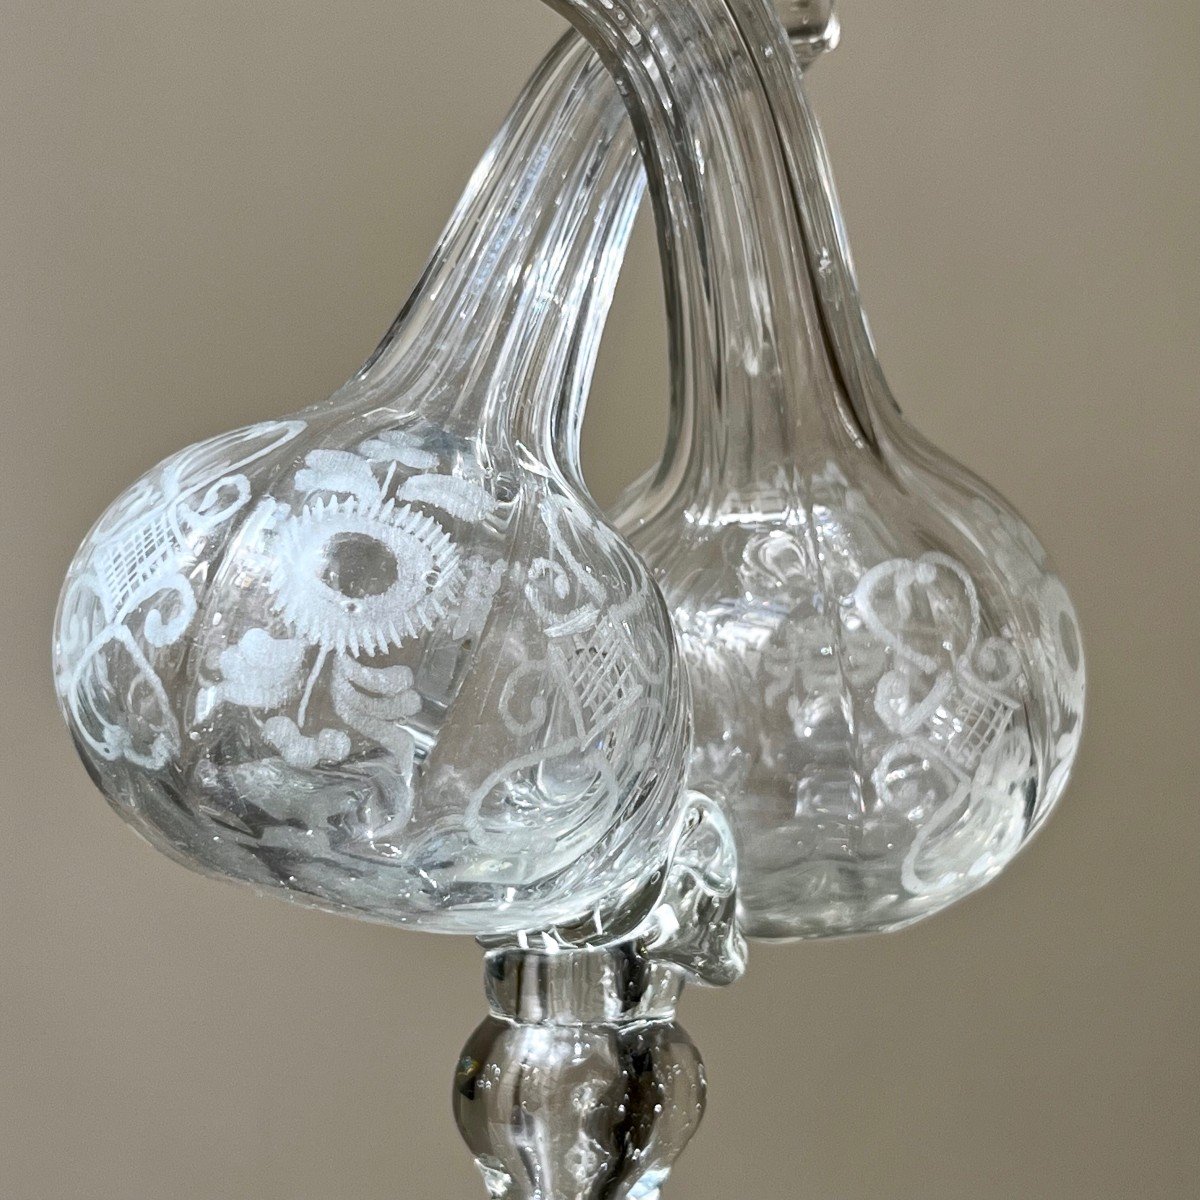 Guédoufle 18th Century Oil Cruet Vinegar Pot In Blown Glass With Godrons And Engraved Decor 18th-photo-3